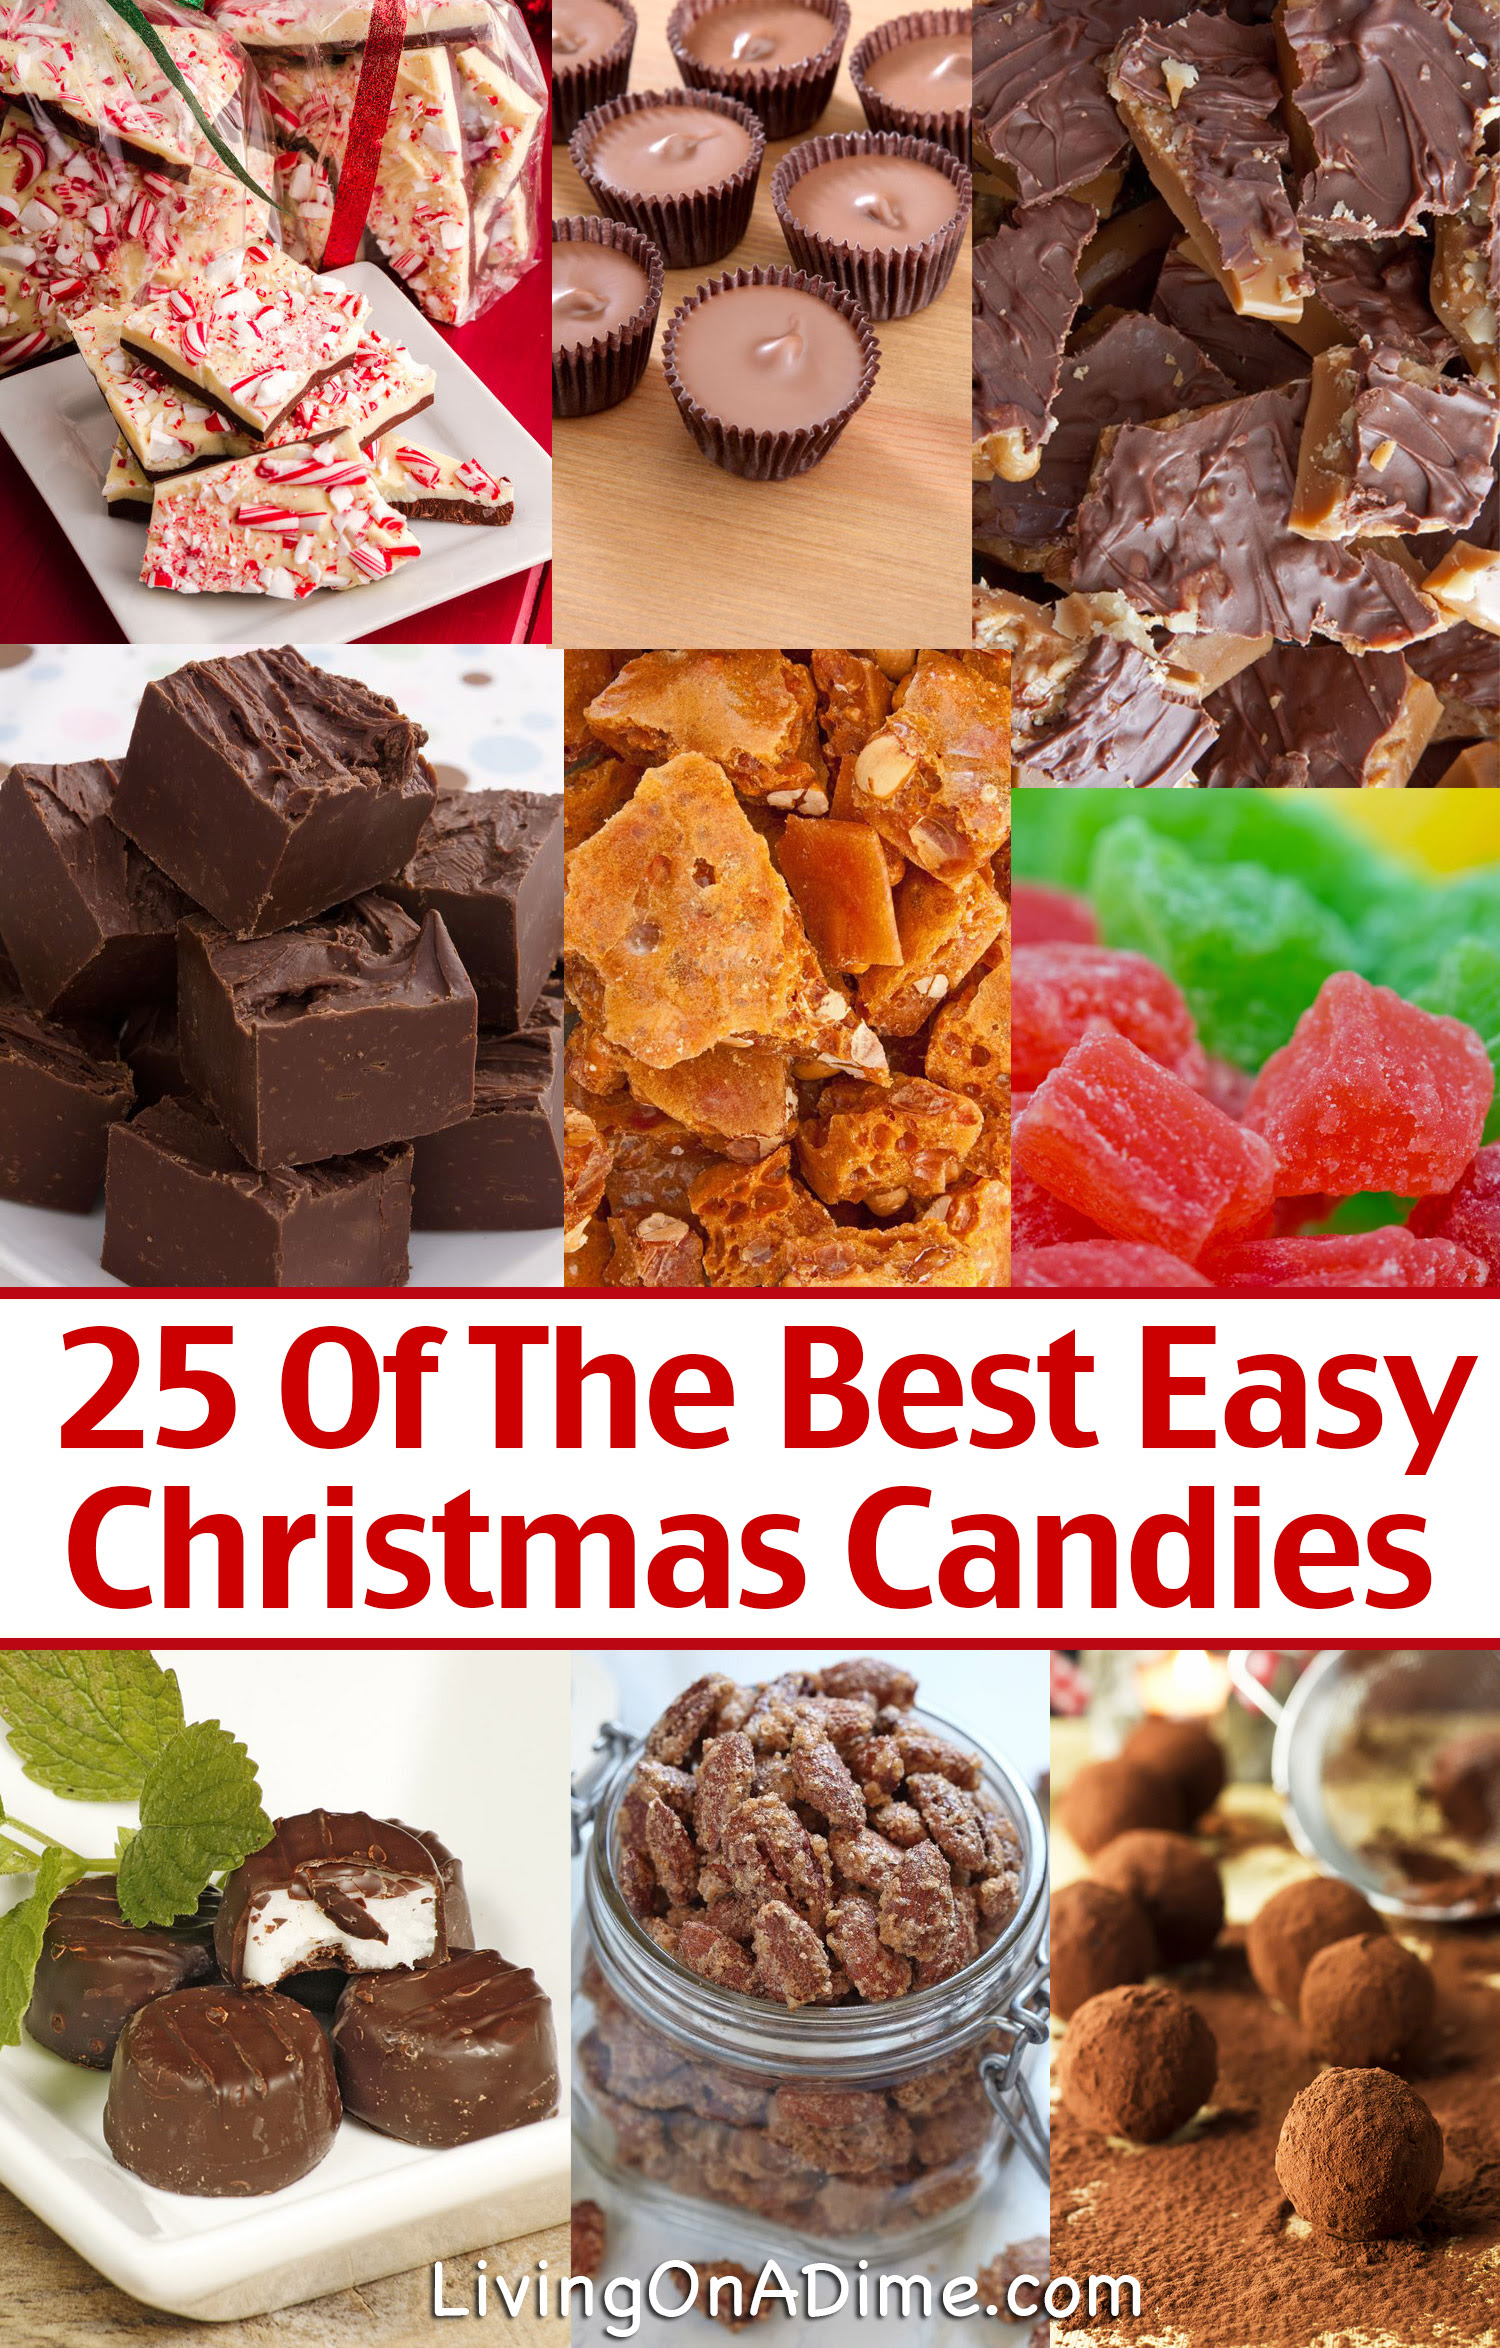 Christmas Fun for the Whole Family: 25 Easy Christmas Candy Recipes